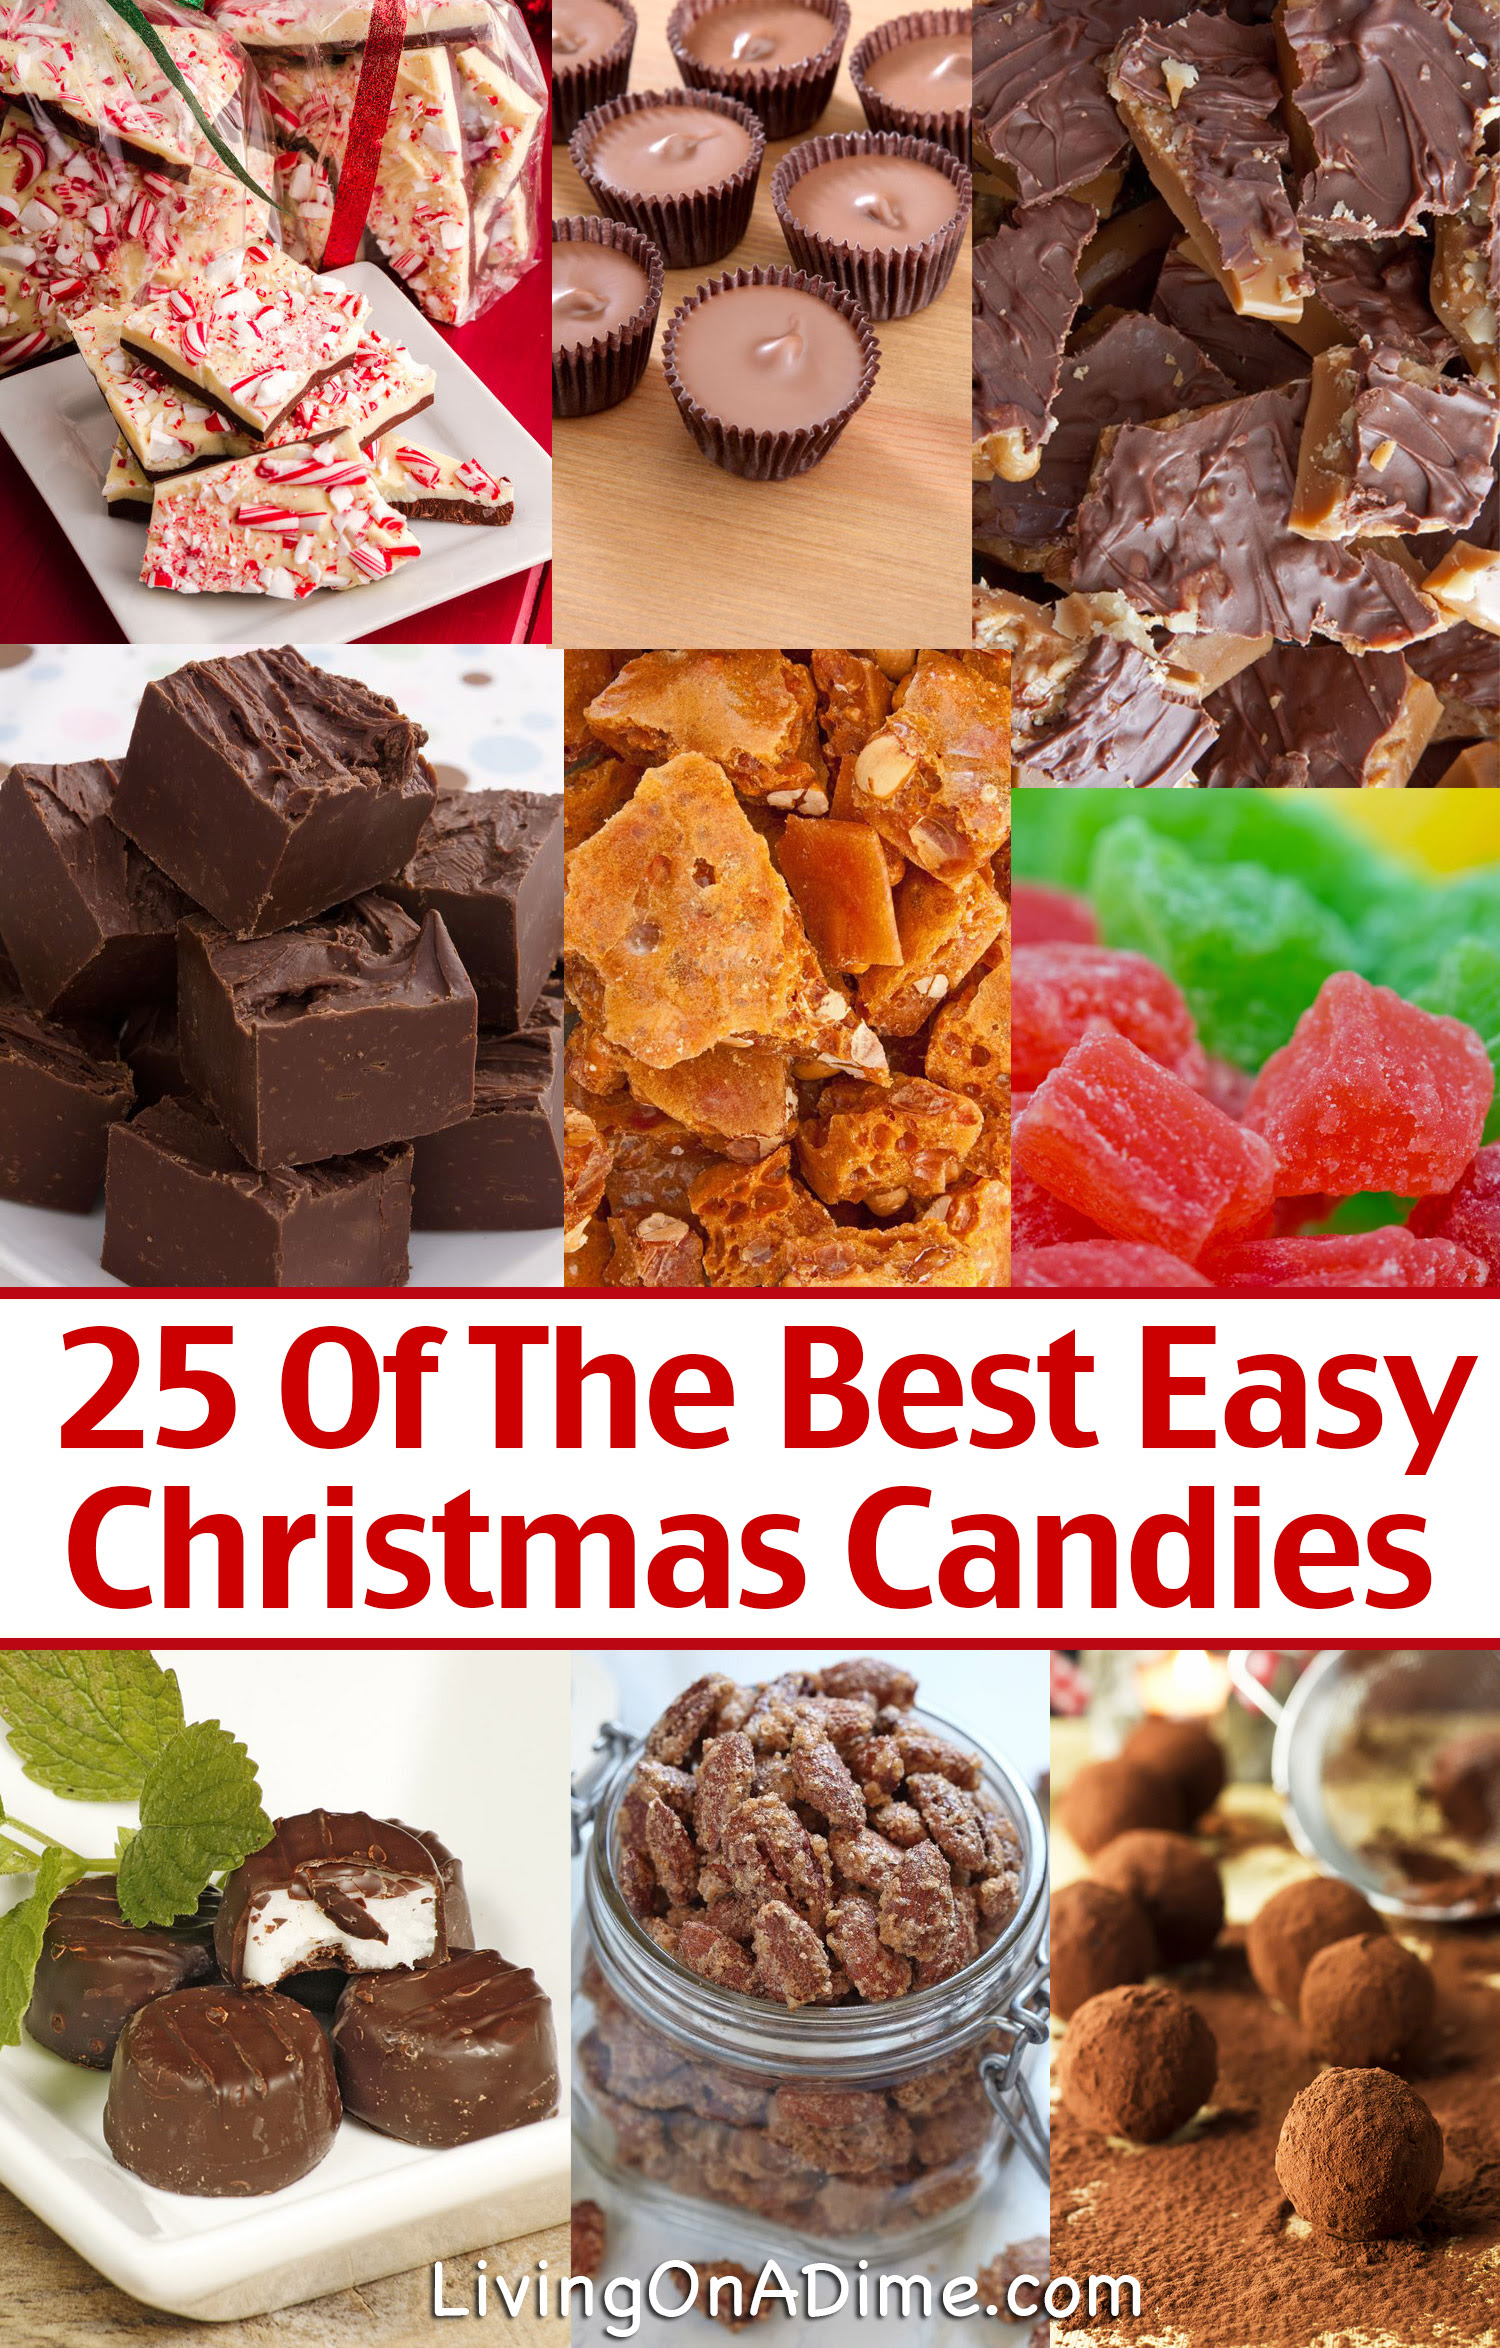 Christmas Fun for the Whole Family: 25 Easy Christmas Candy Recipes